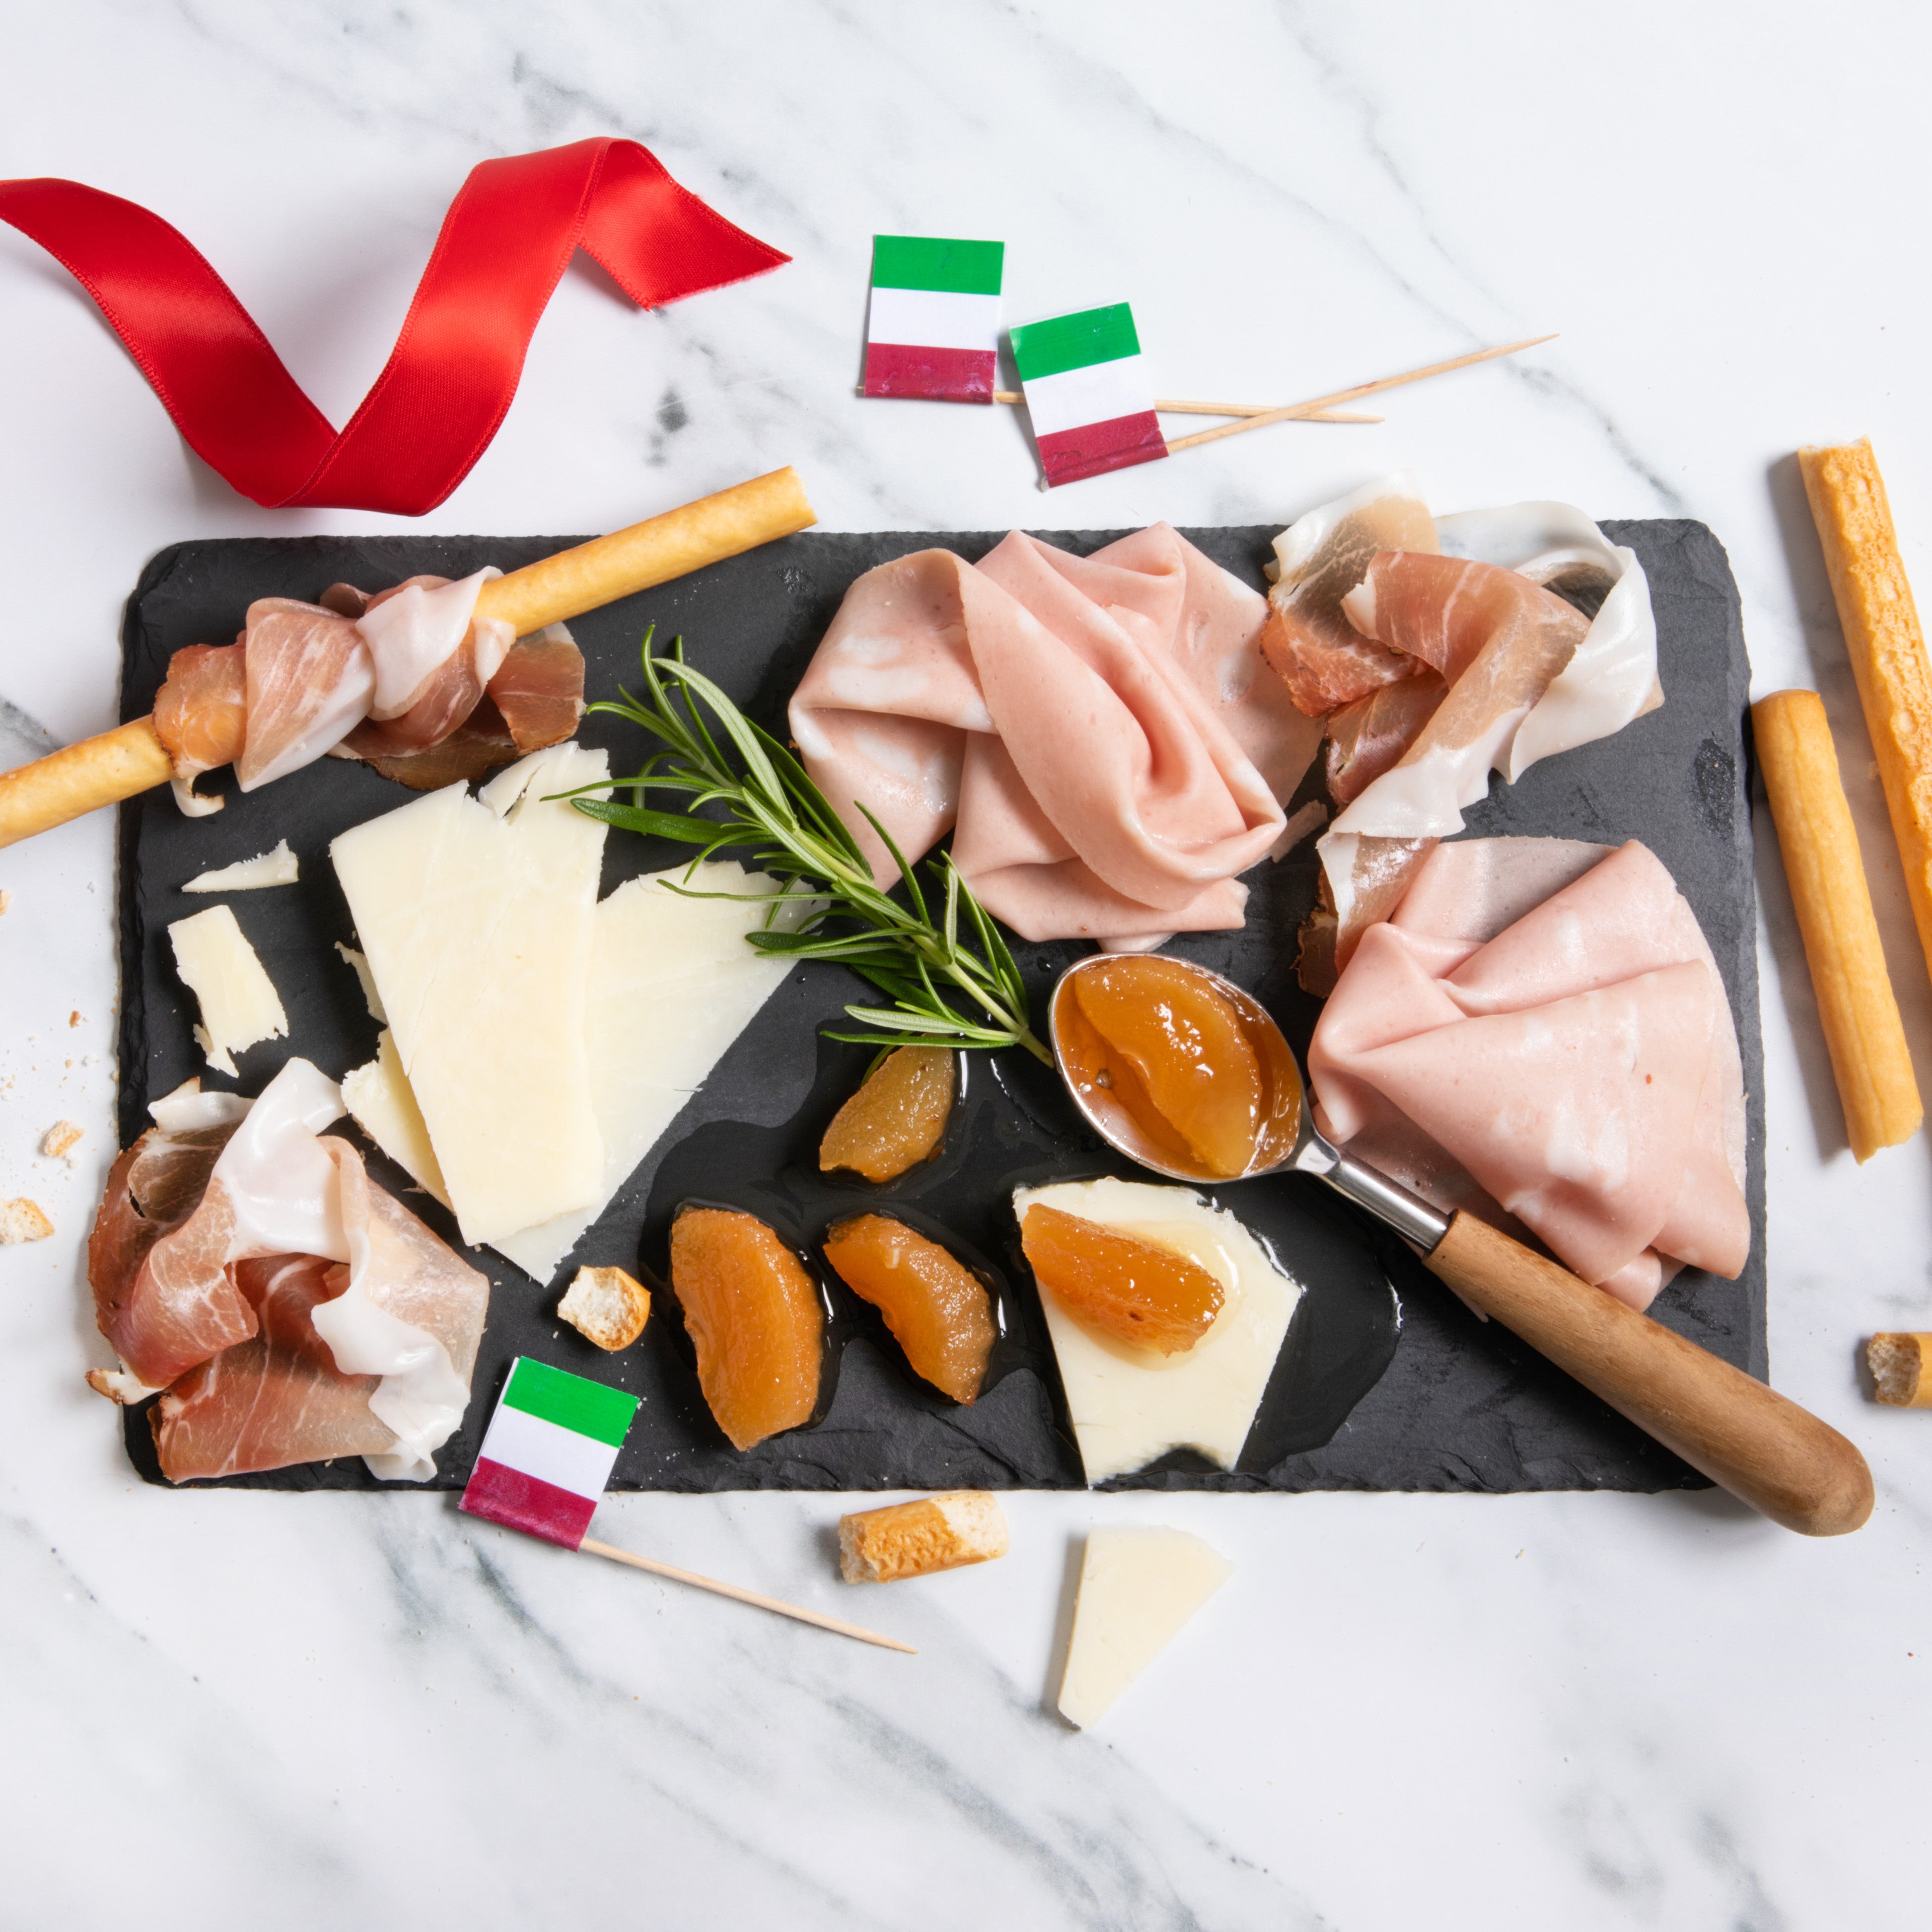 How To Build A Summer Charcuterie Board - Shared Appetite